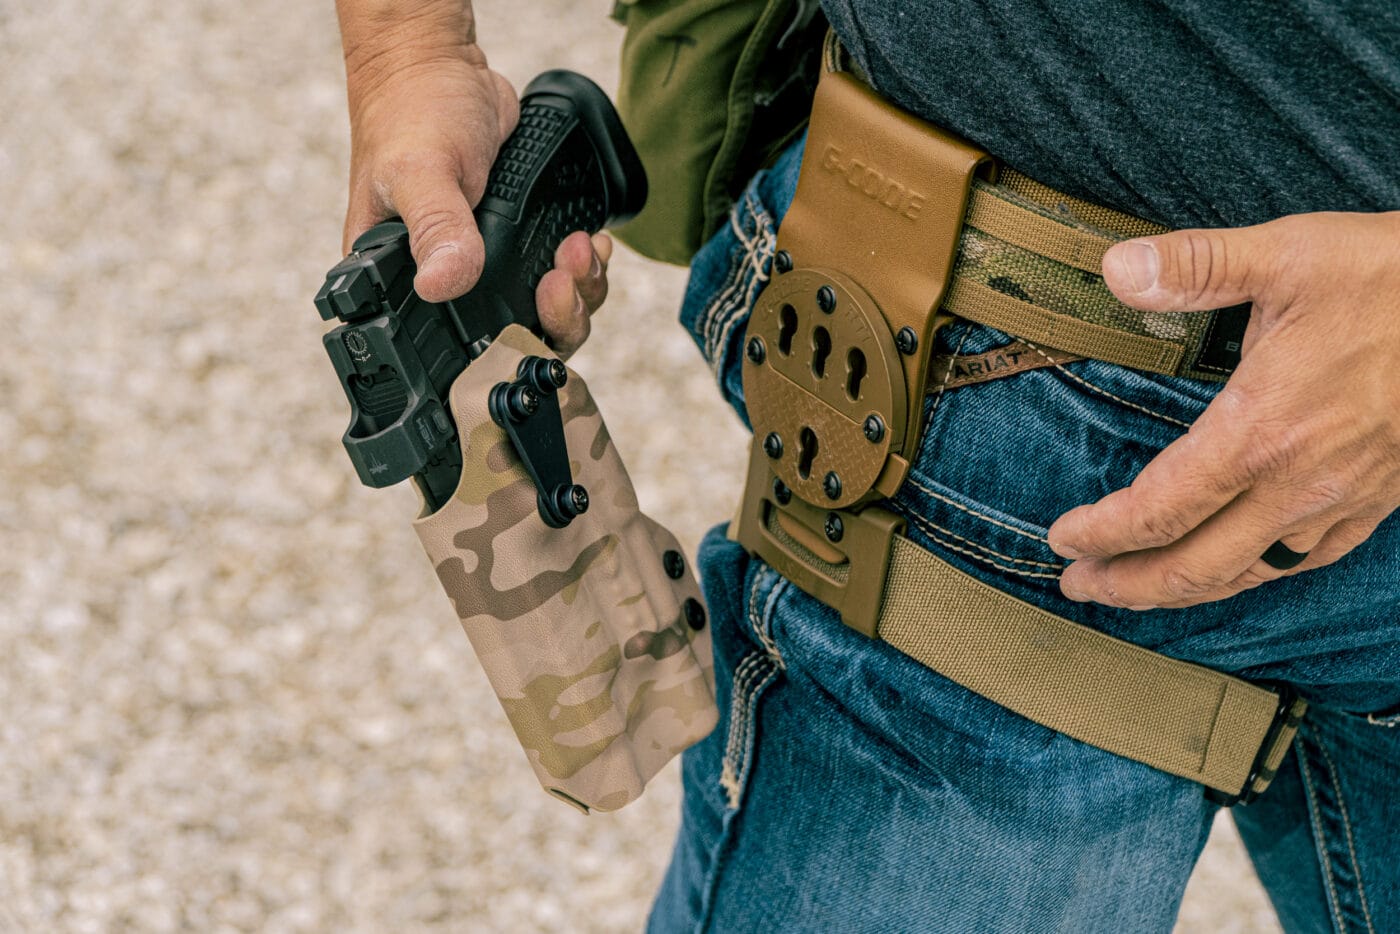 Holster mounting to battle belt